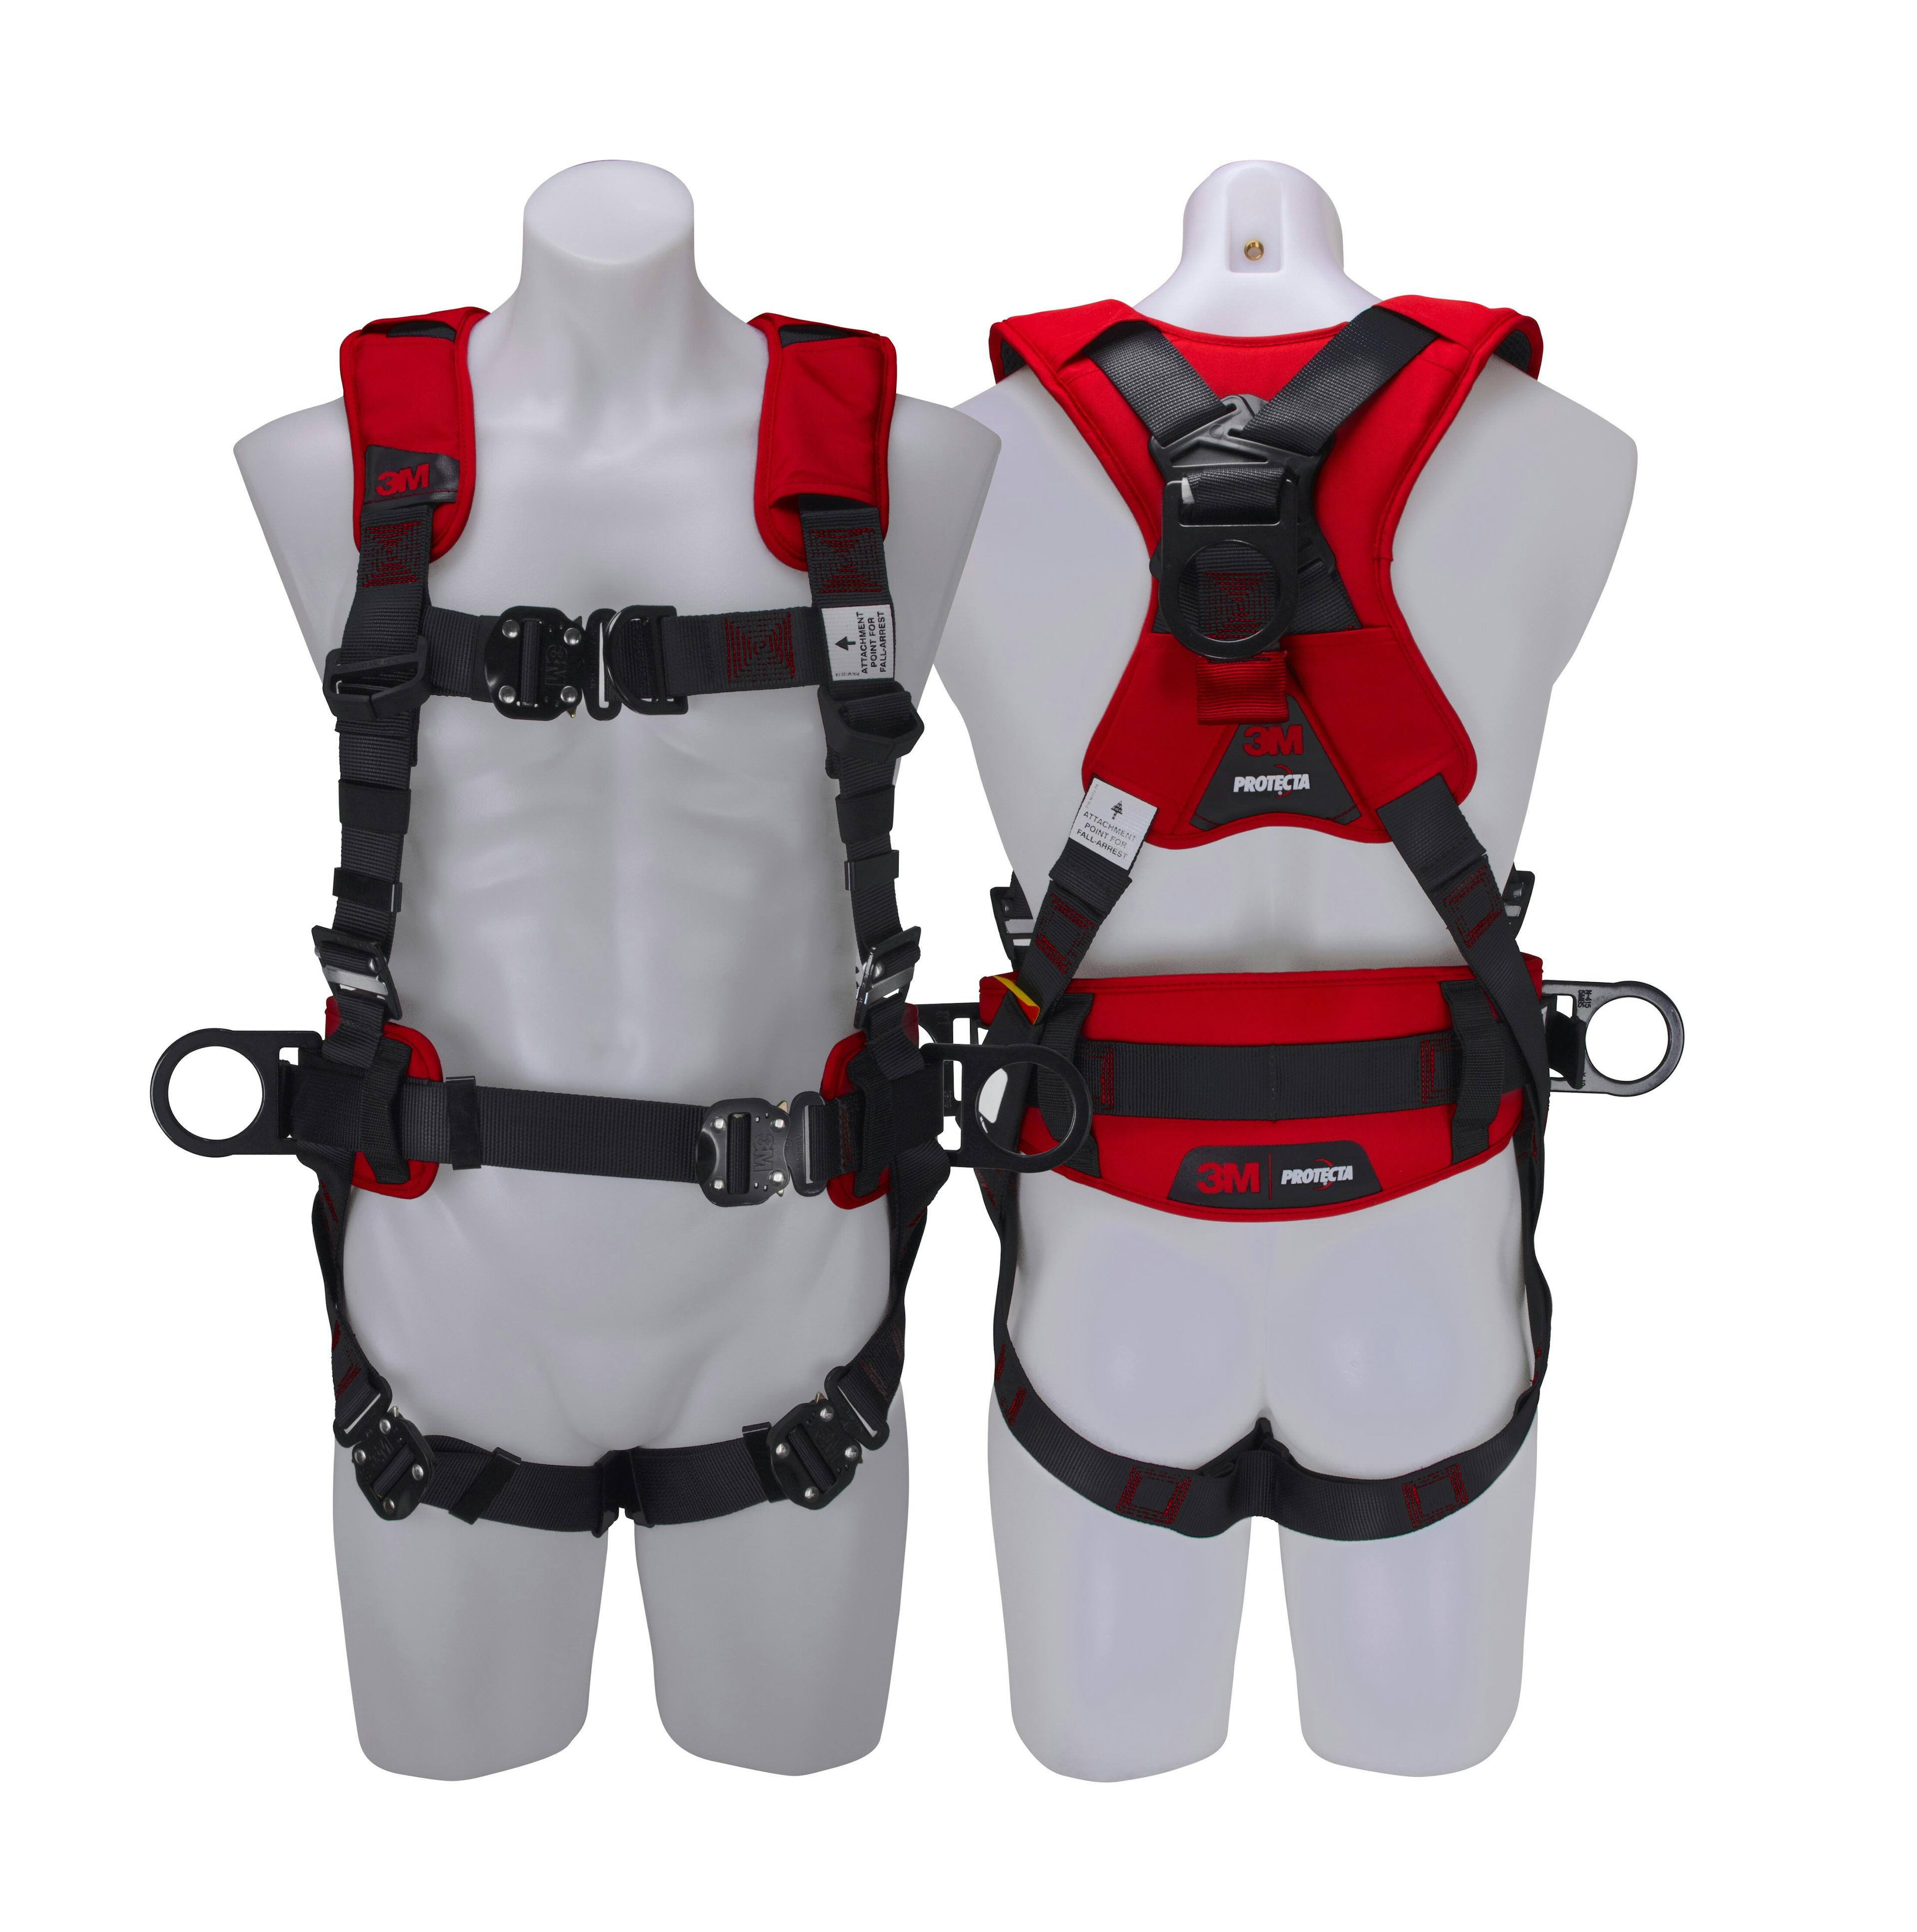 3M™ PROTECTA® X All Purpose Harness with Padding 1161681, Red and Black, Medium, 1 EA/Case